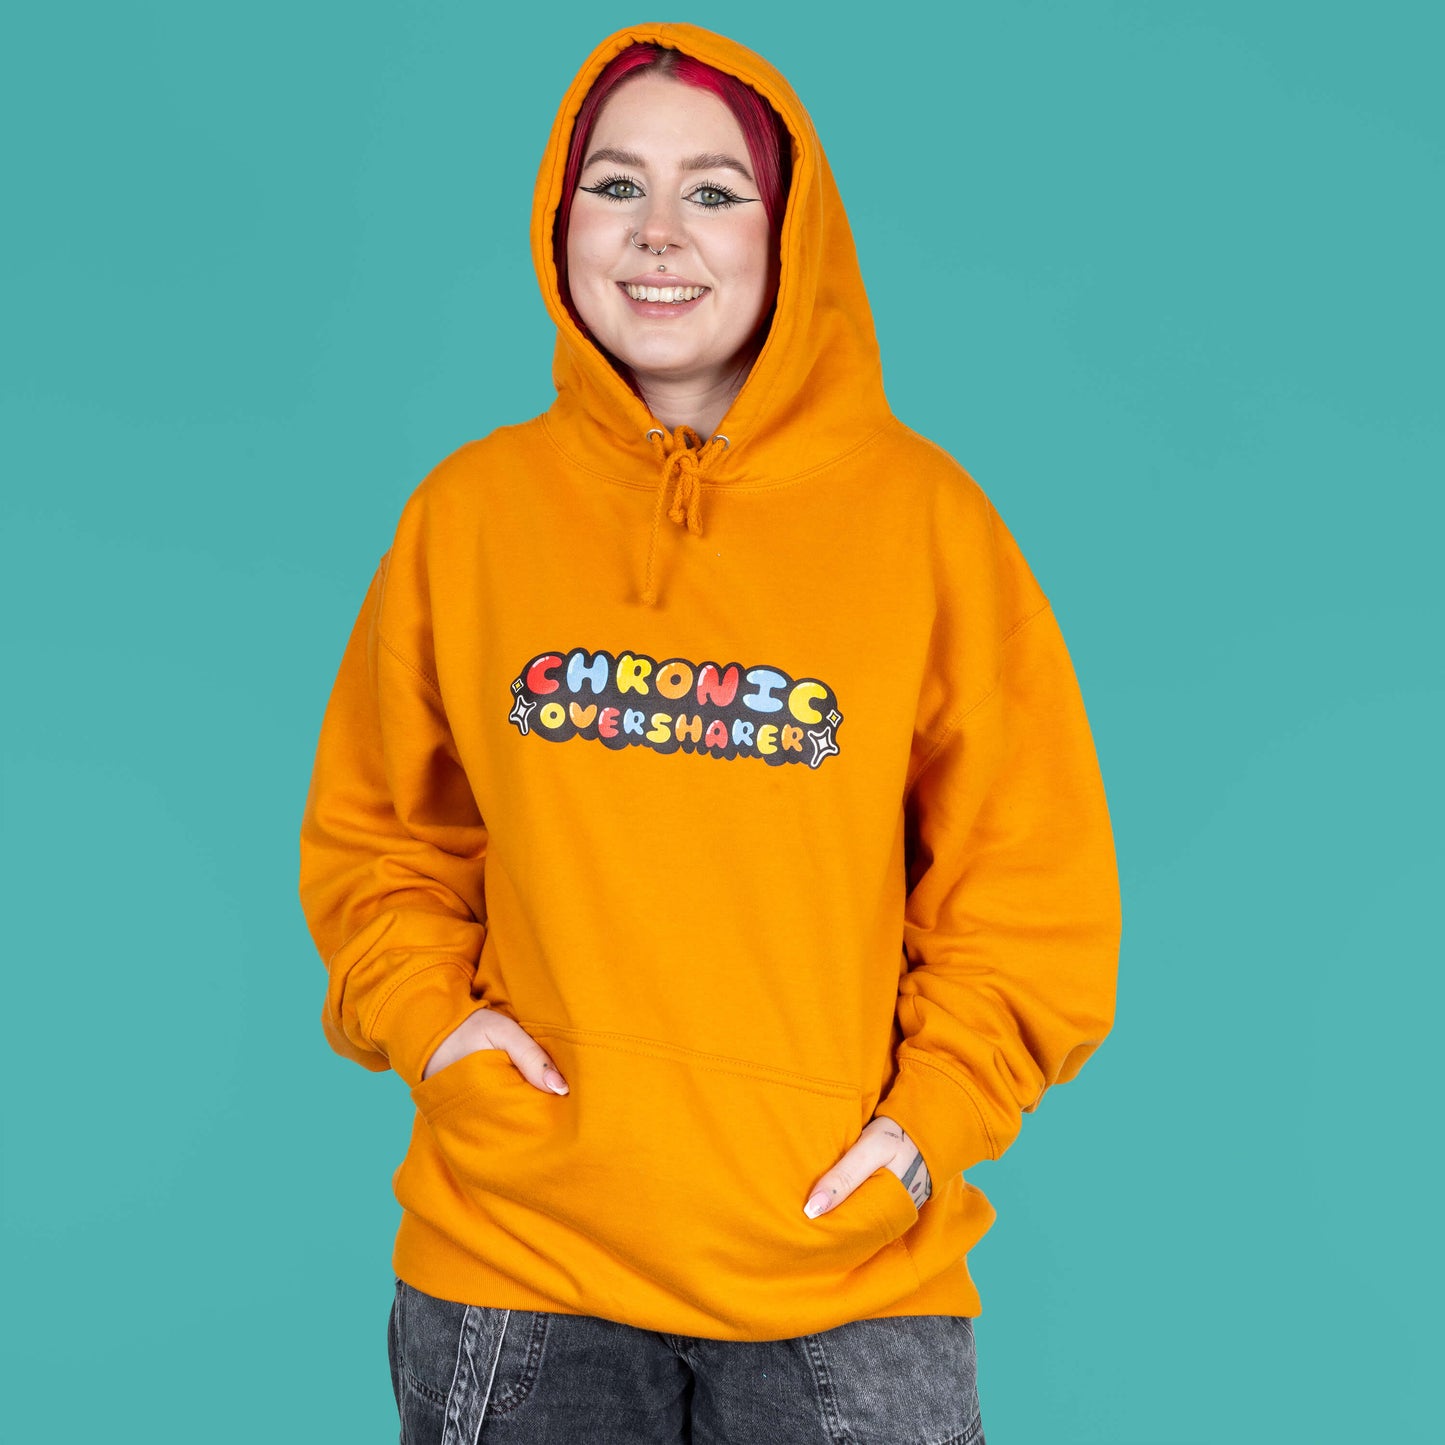 The Chronic Over Sharer Pumpkin Orange Hoodie modelled on Flo, a red haired alternative model, in front of a blue background. She is facing forward smiling with both hands in the front pocket and the hood up, photo is cropped from the thighs up. The pumpkin orange hoodie features a drawstring hood, a large front pocket and the text 'chronic oversharer' in rainbow bubble font with a black shadow effect and white sparkles. The design was created to raise awareness for neurodivergent disorders such as ADHD.